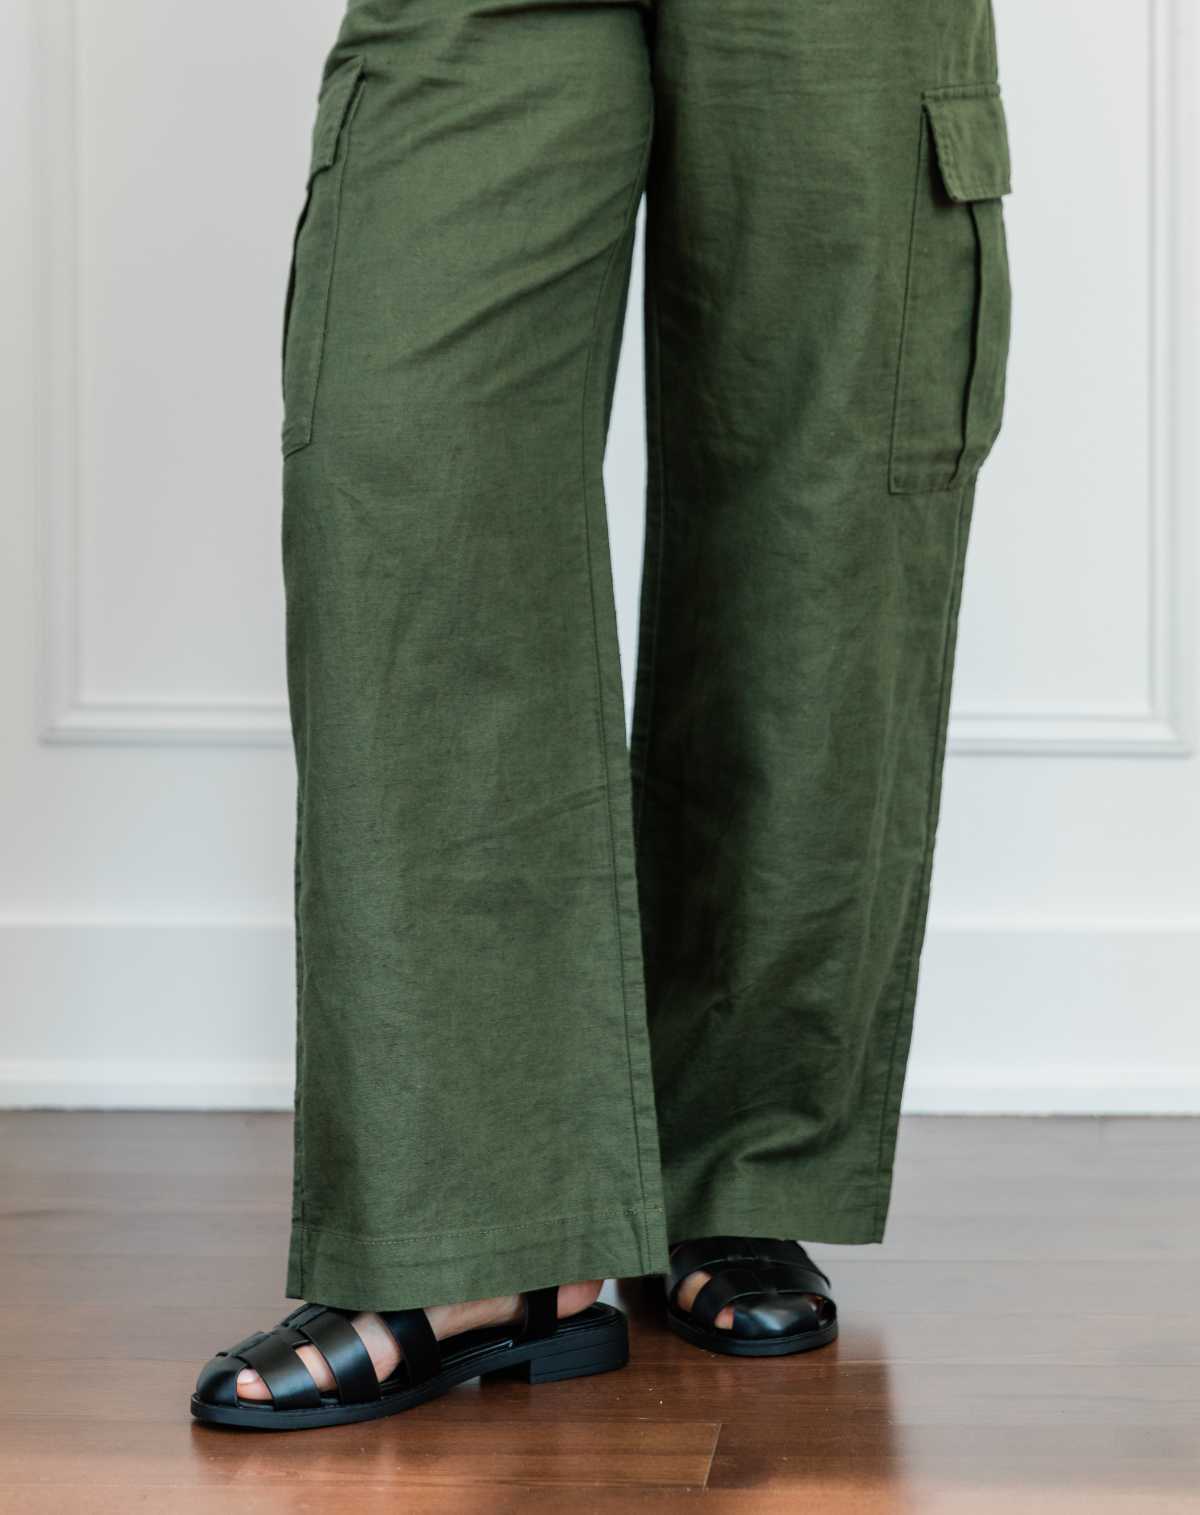 Cropped view of woman's legs wearing black fisherman sandals with full length wide olive green linen pants.